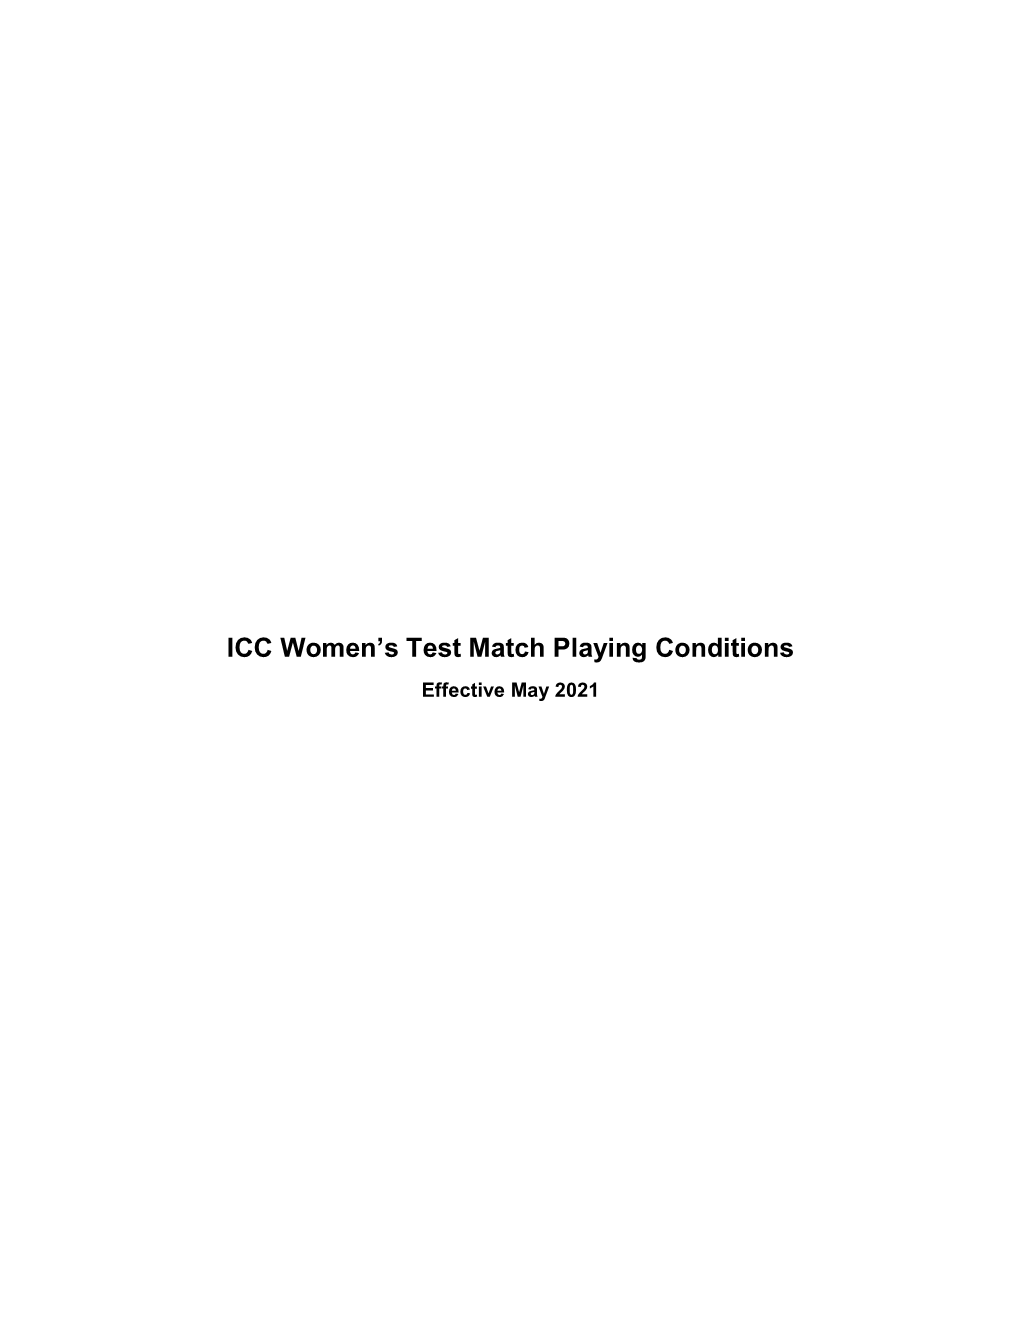 ICC Women's Test Match Playing Conditions